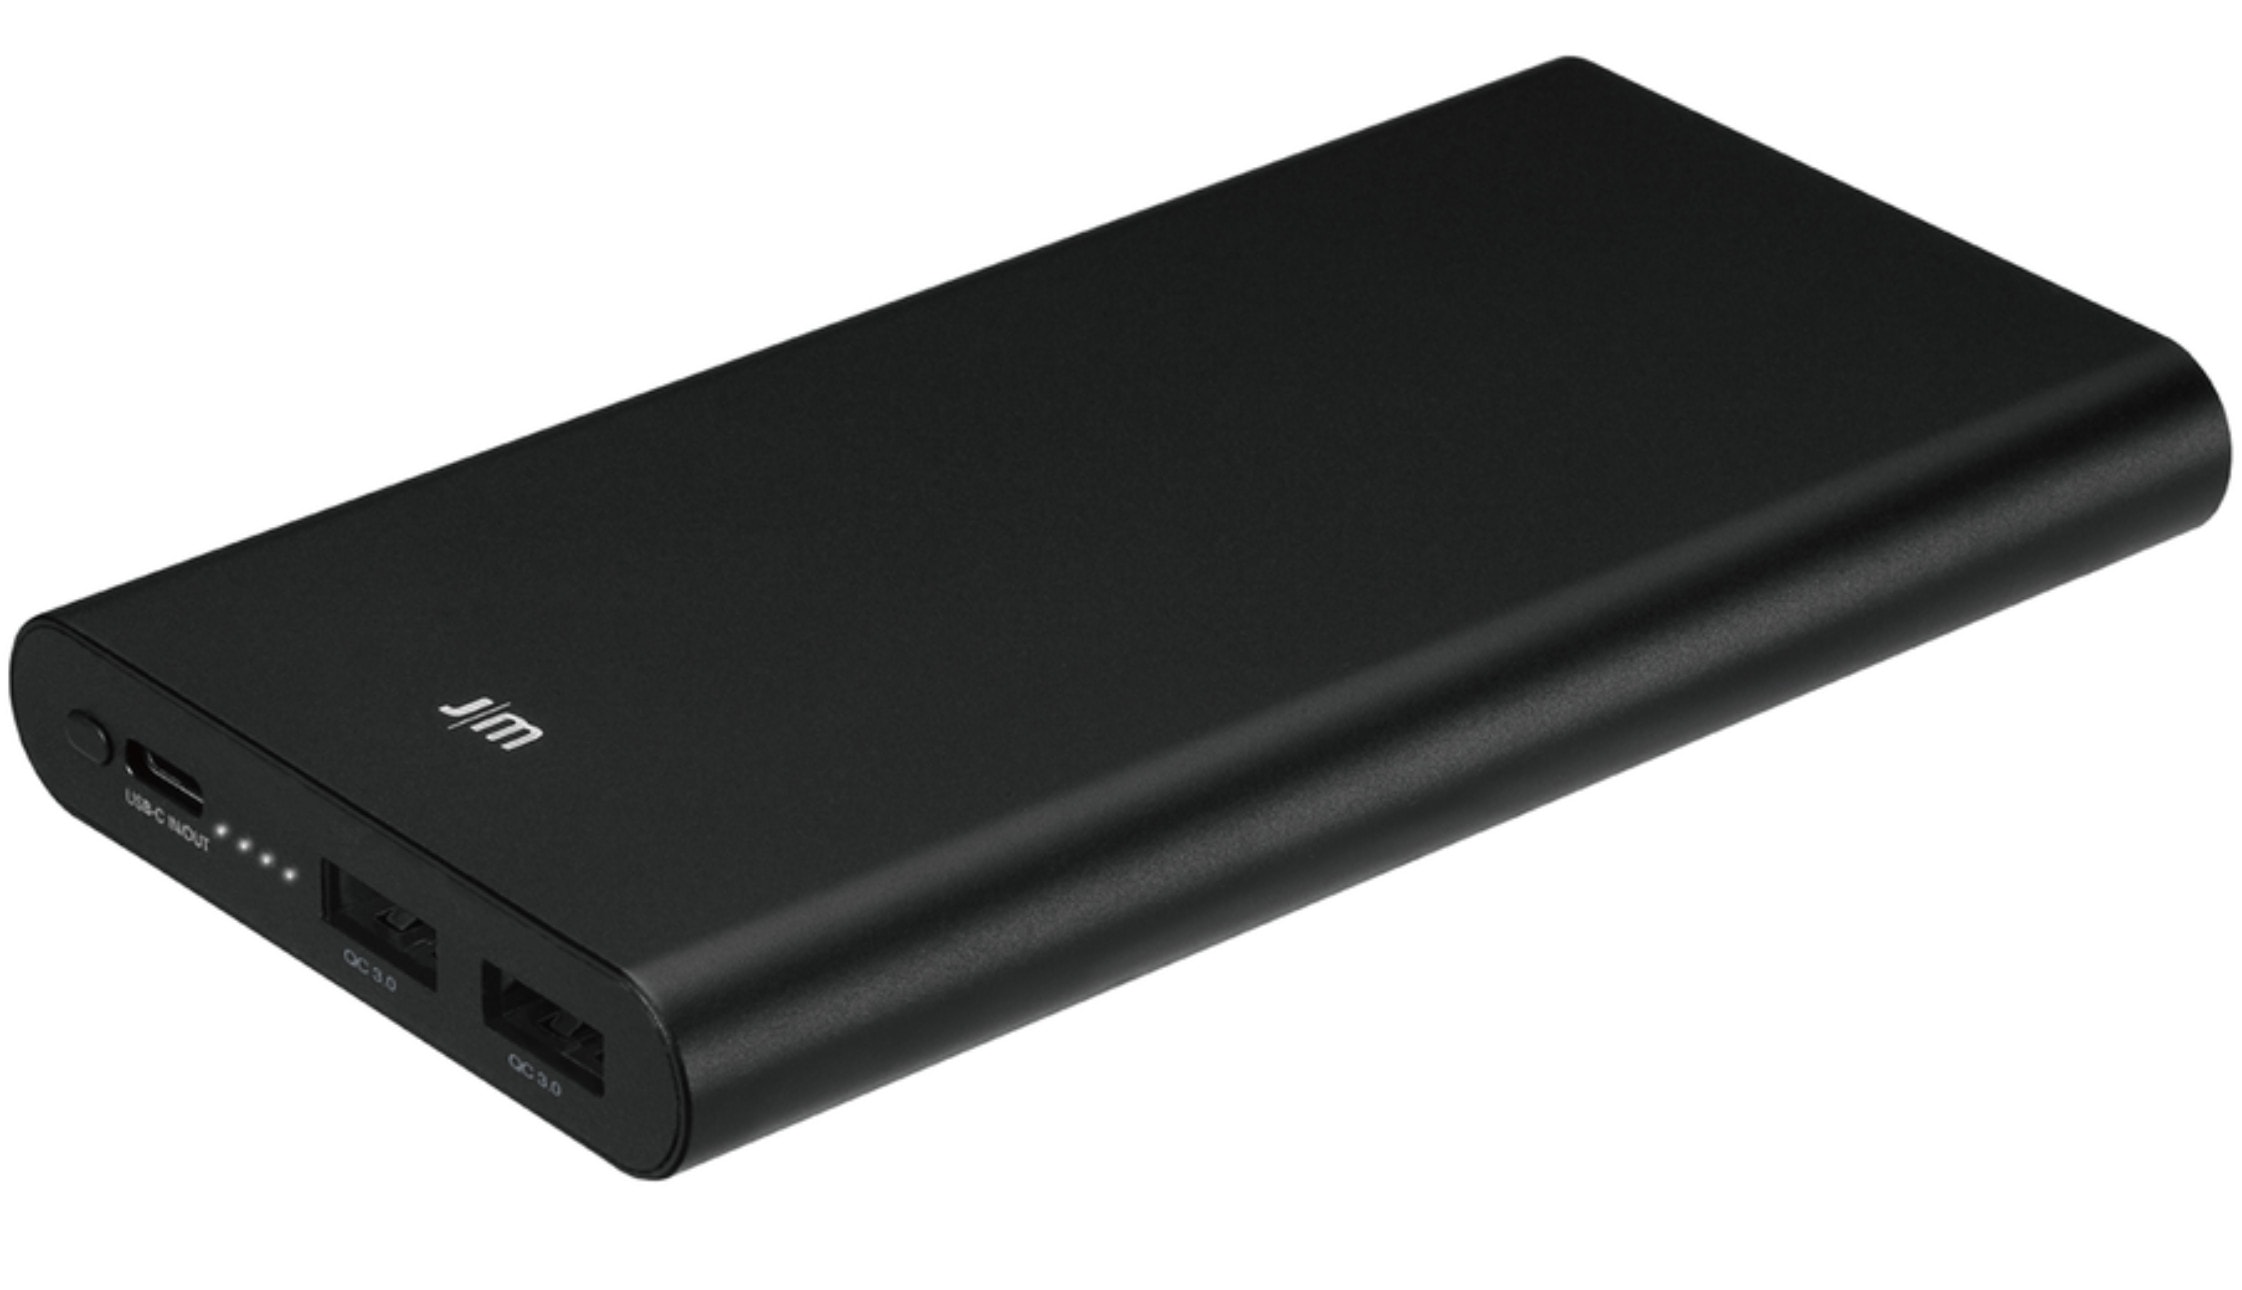 Never run out of power again with the mighty Gum Slim portable charger.